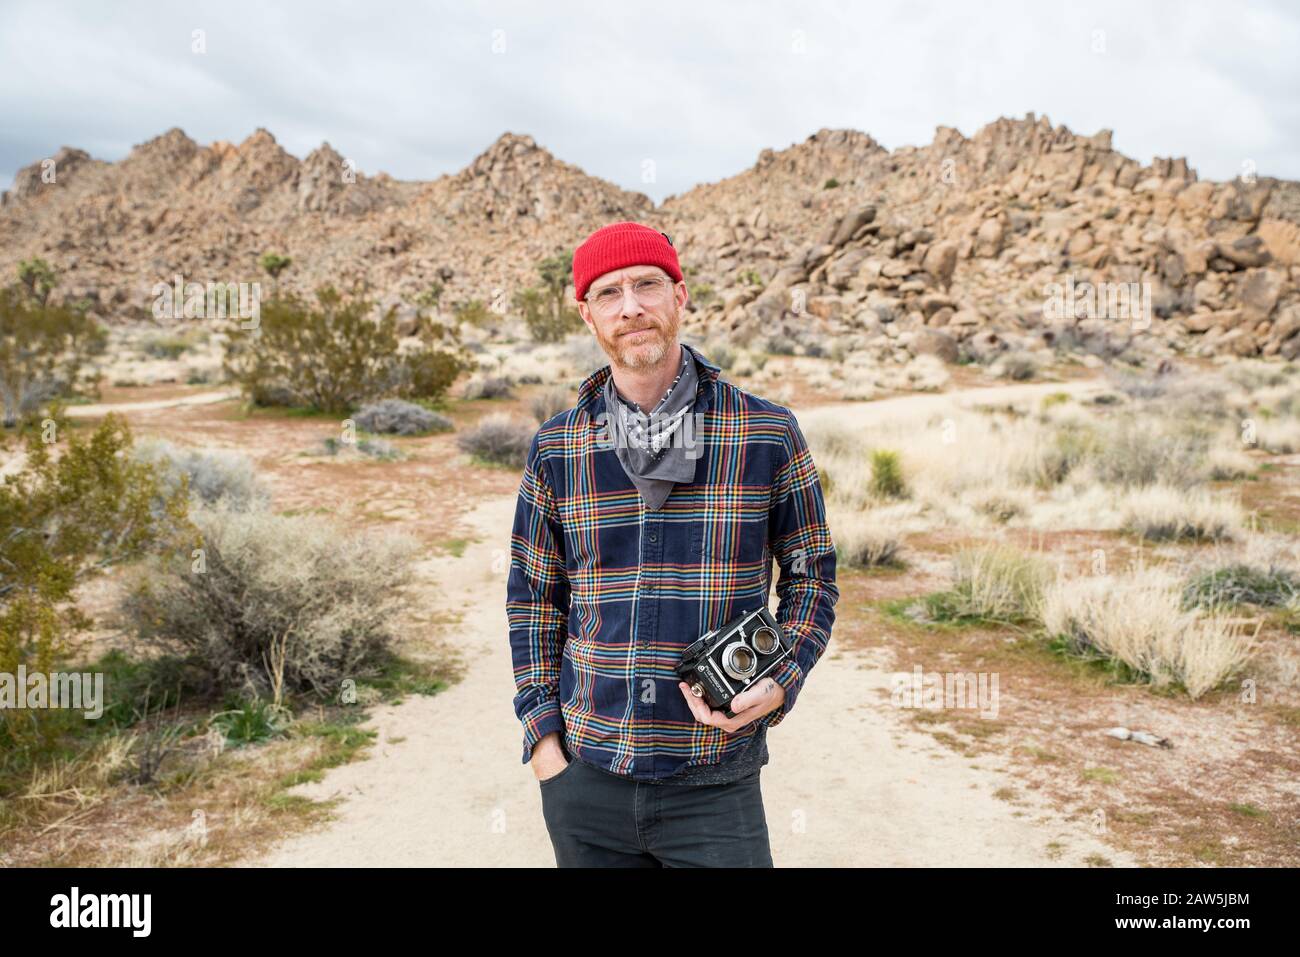 Man in beanie with beard and glasses by far off stone piles in desert Stock Photo